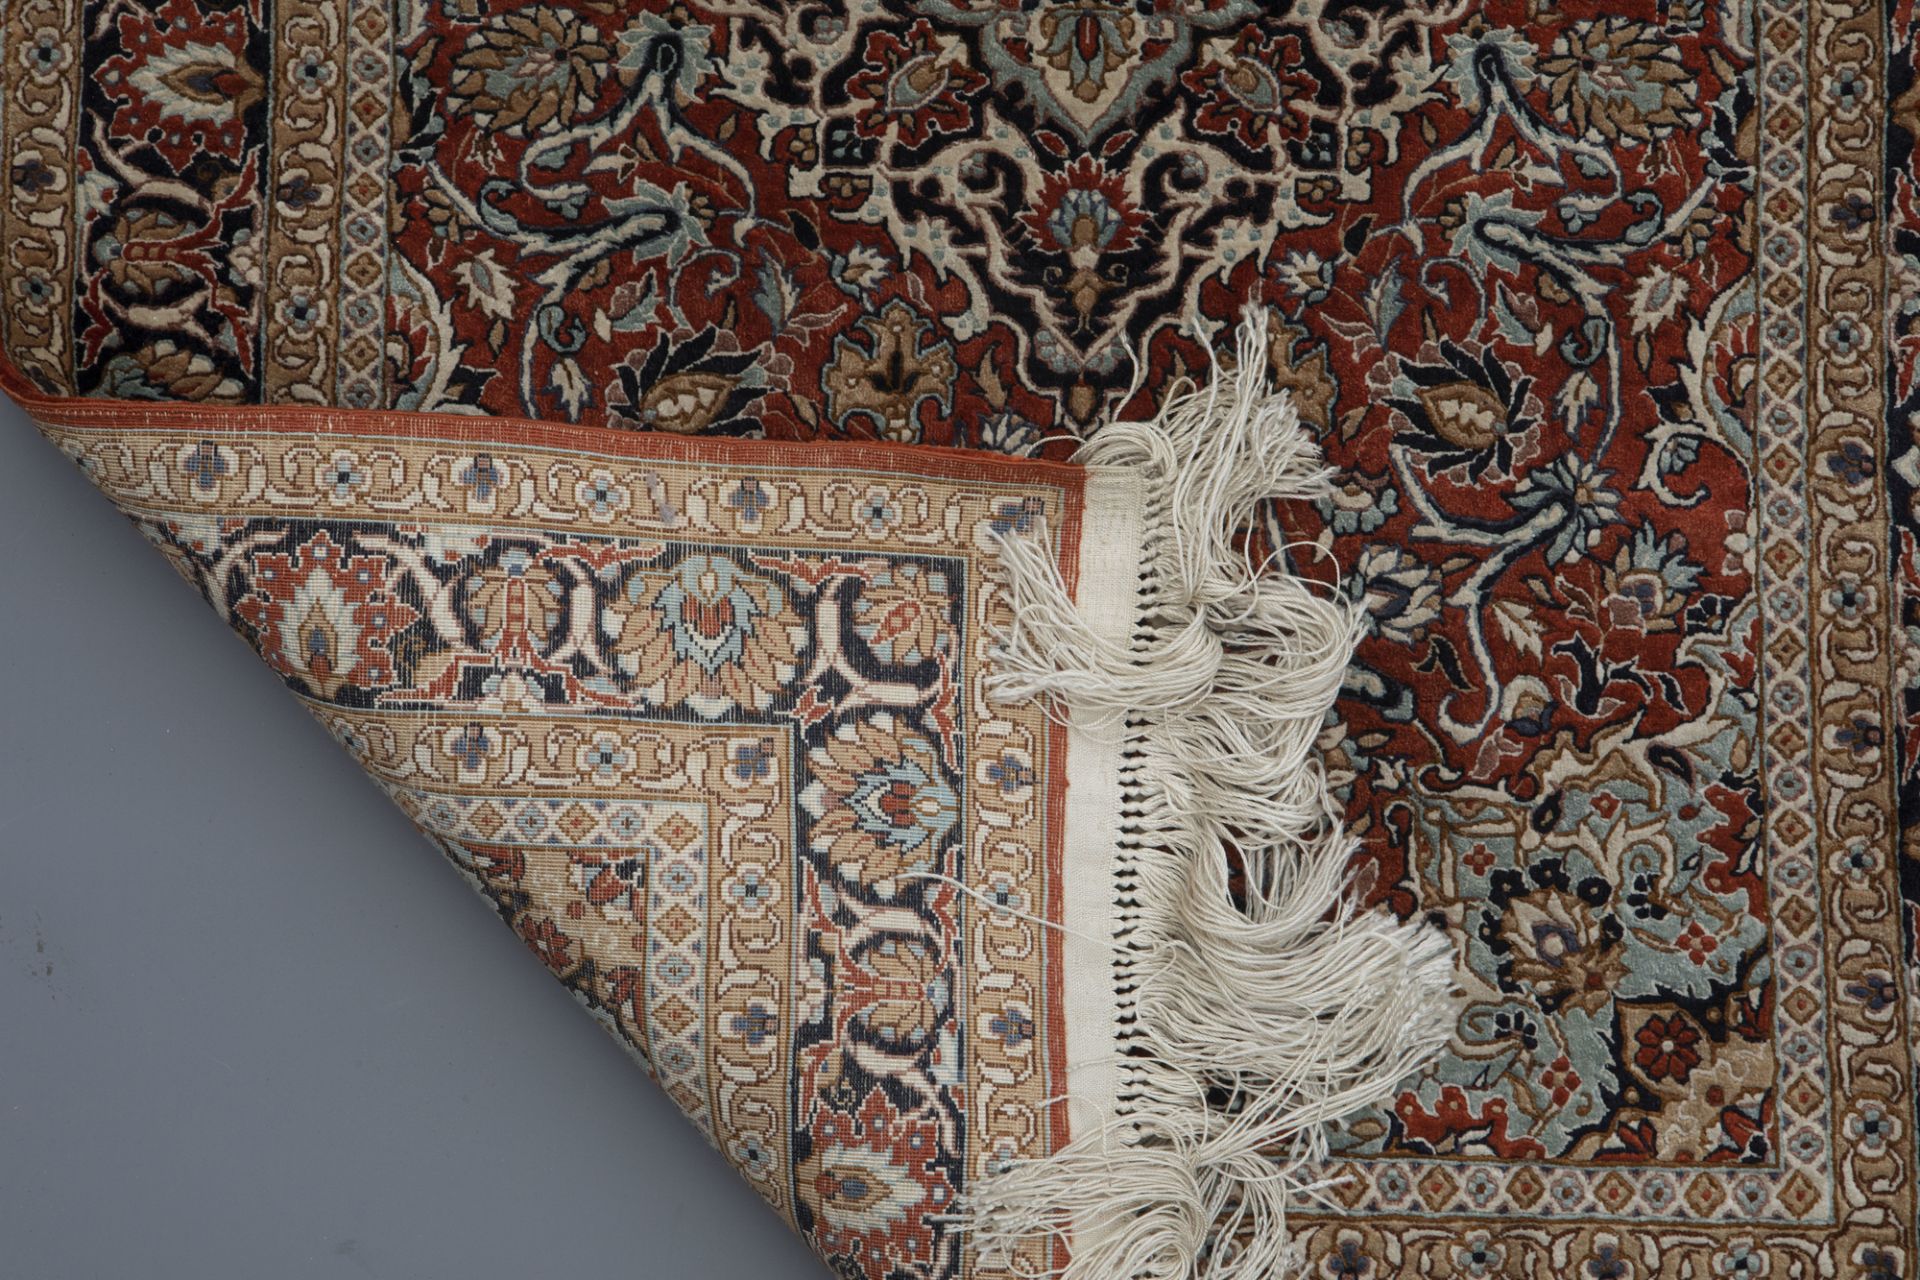 Three Oriental rugs with floral design and a central medallion, silk on cotton, 20th C. - Image 2 of 5